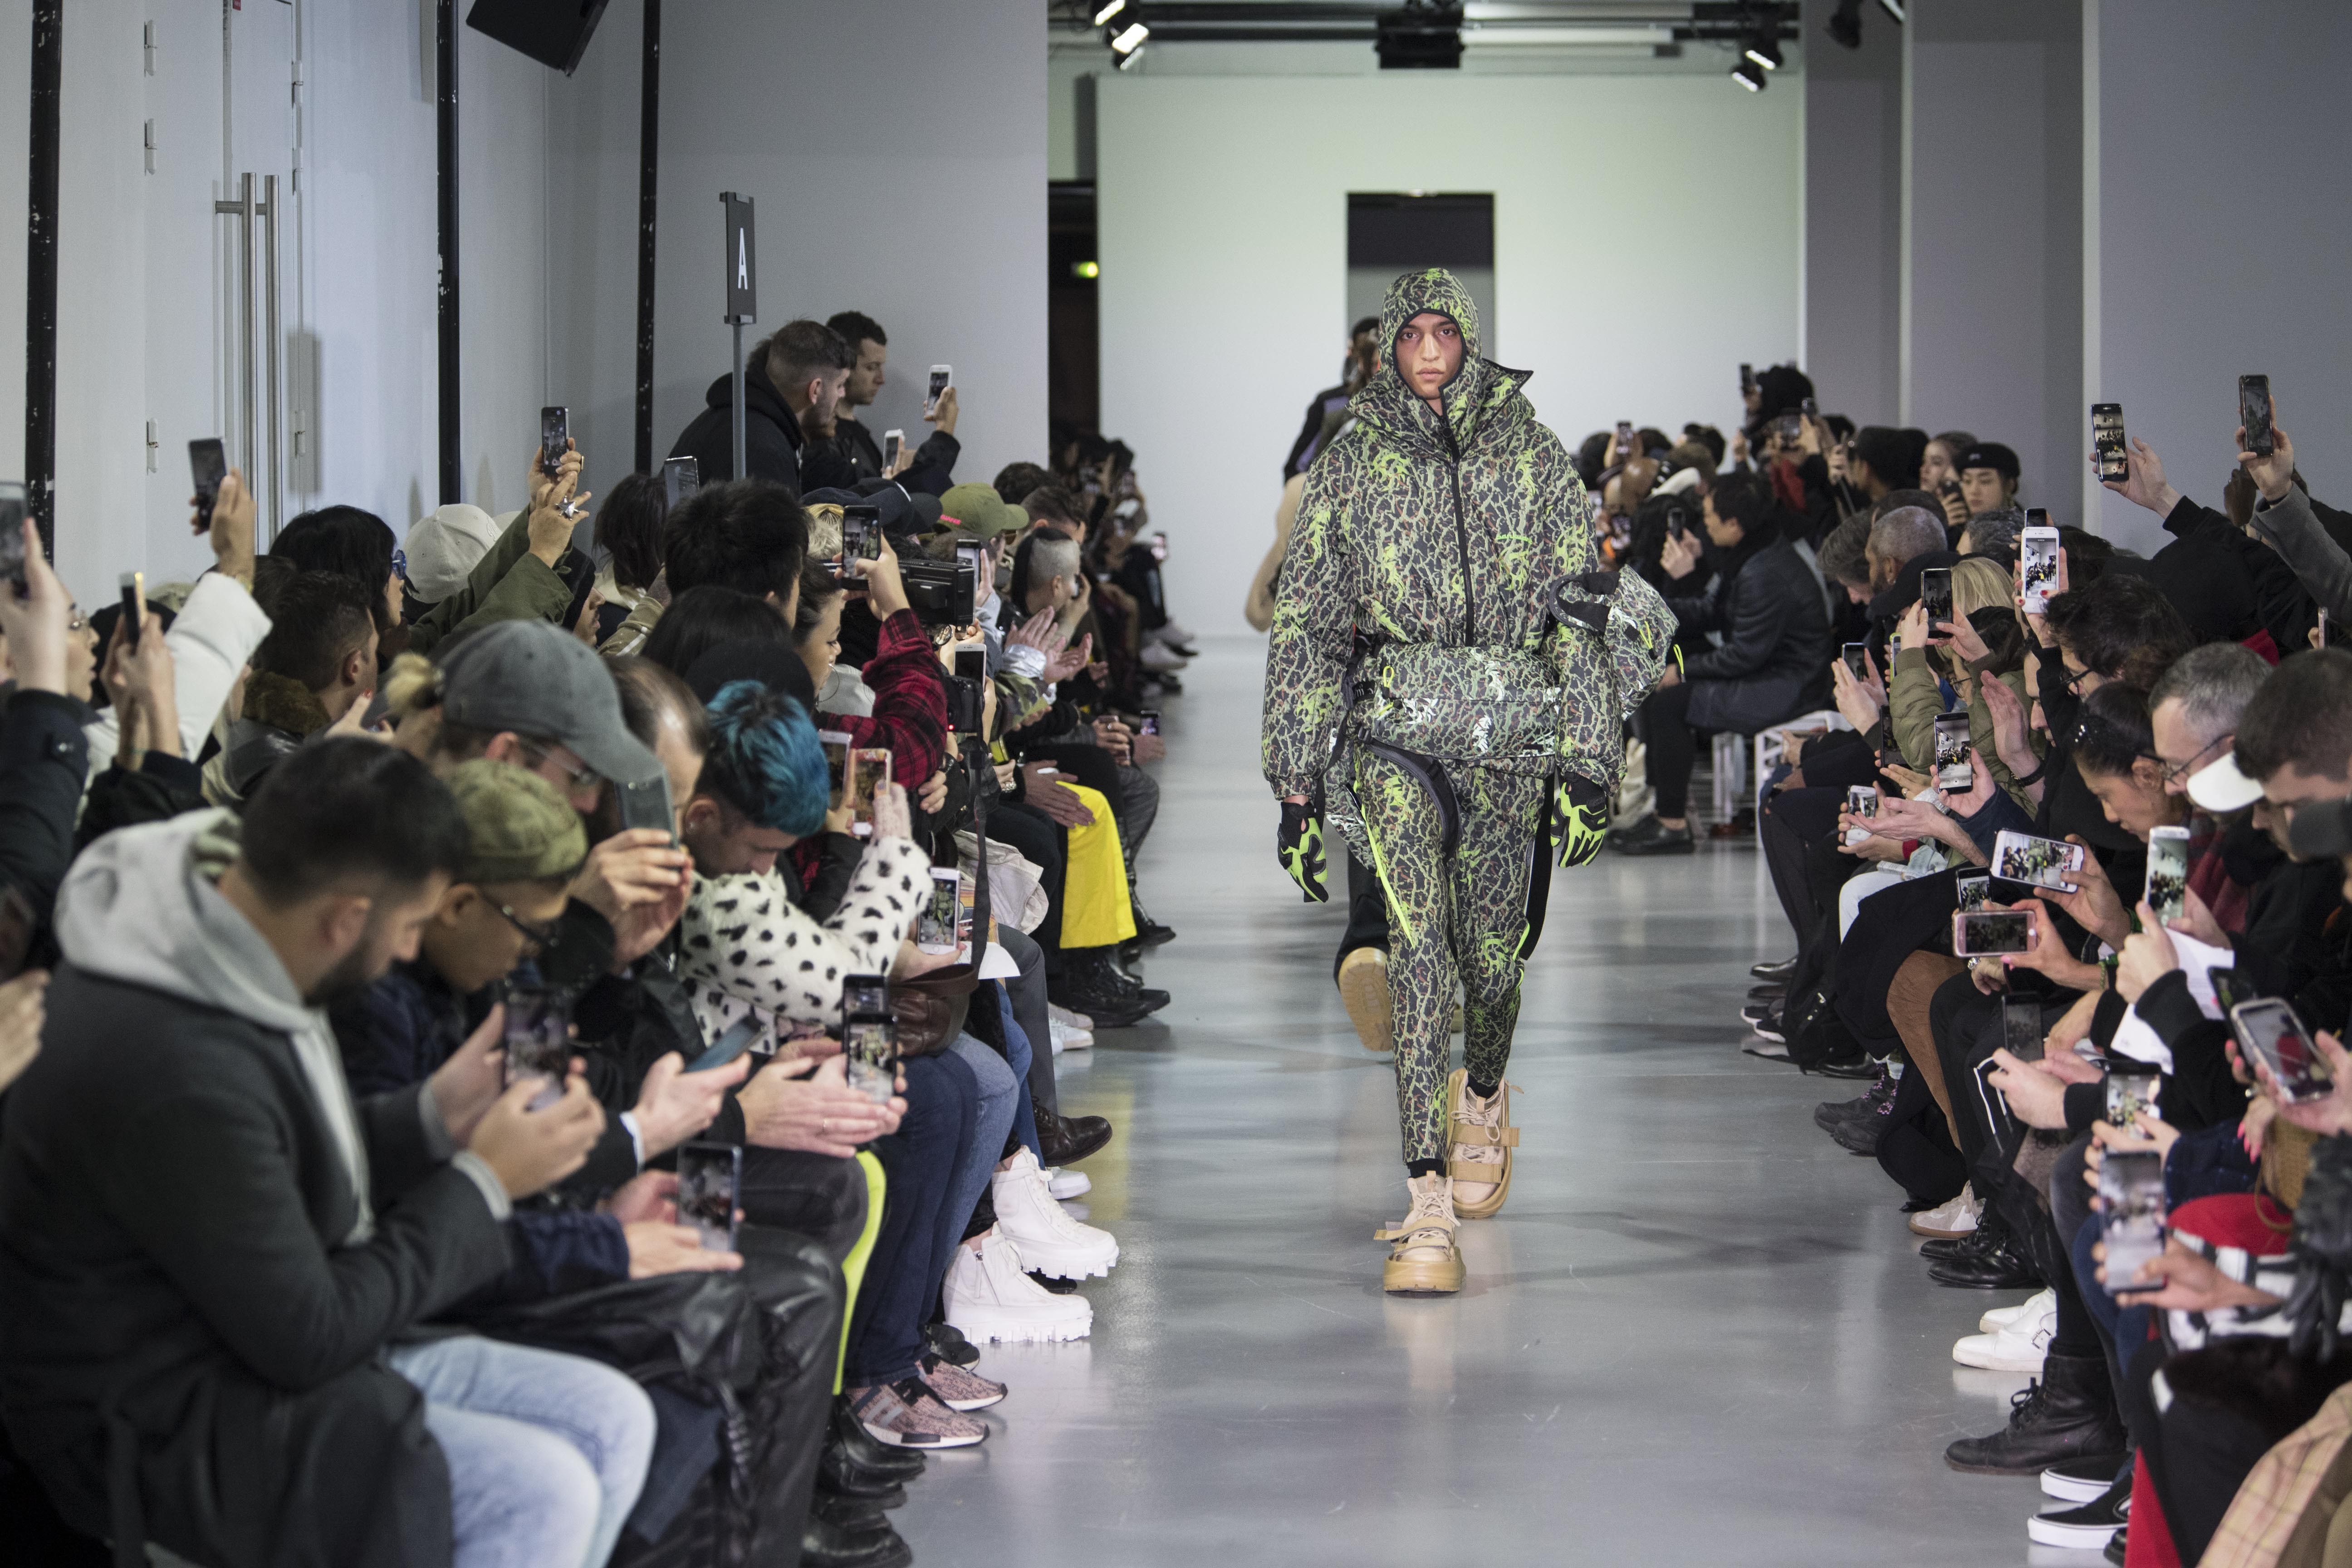 Whether it was a collection inspired by the last Chinese emperor, bomber blazer hybrids, reflections on Americana or a doomsday scenario in armoured suits, these designers lit up the Paris catwalks with autumn 2018 collections